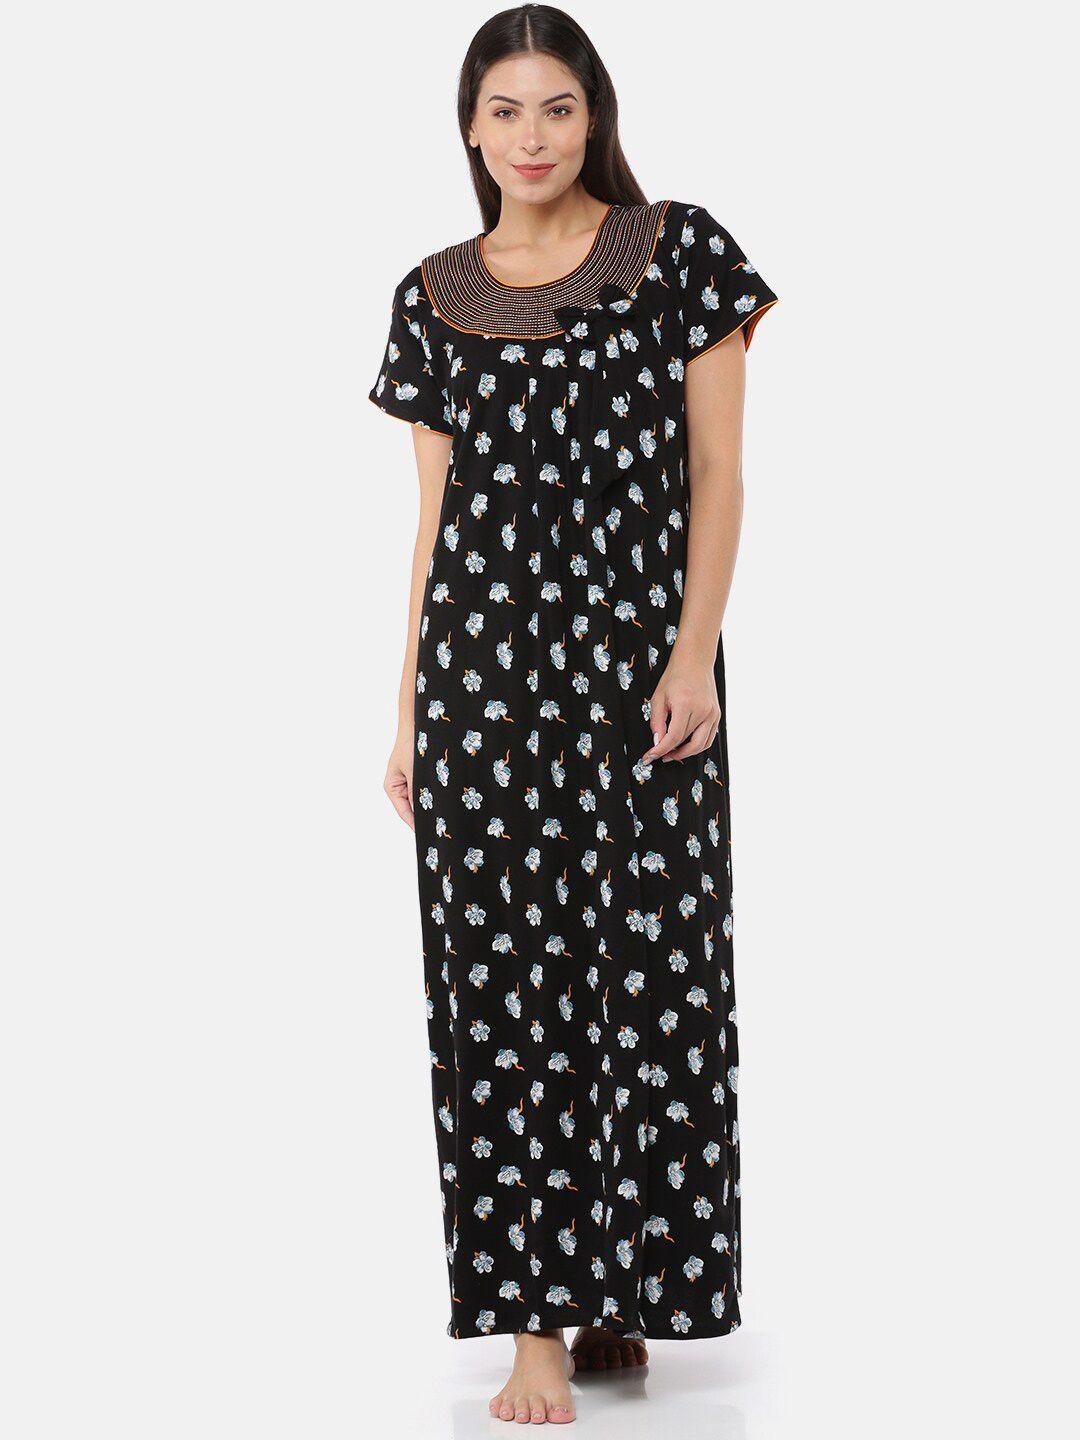 9shines label black embroidered maxi nightdress